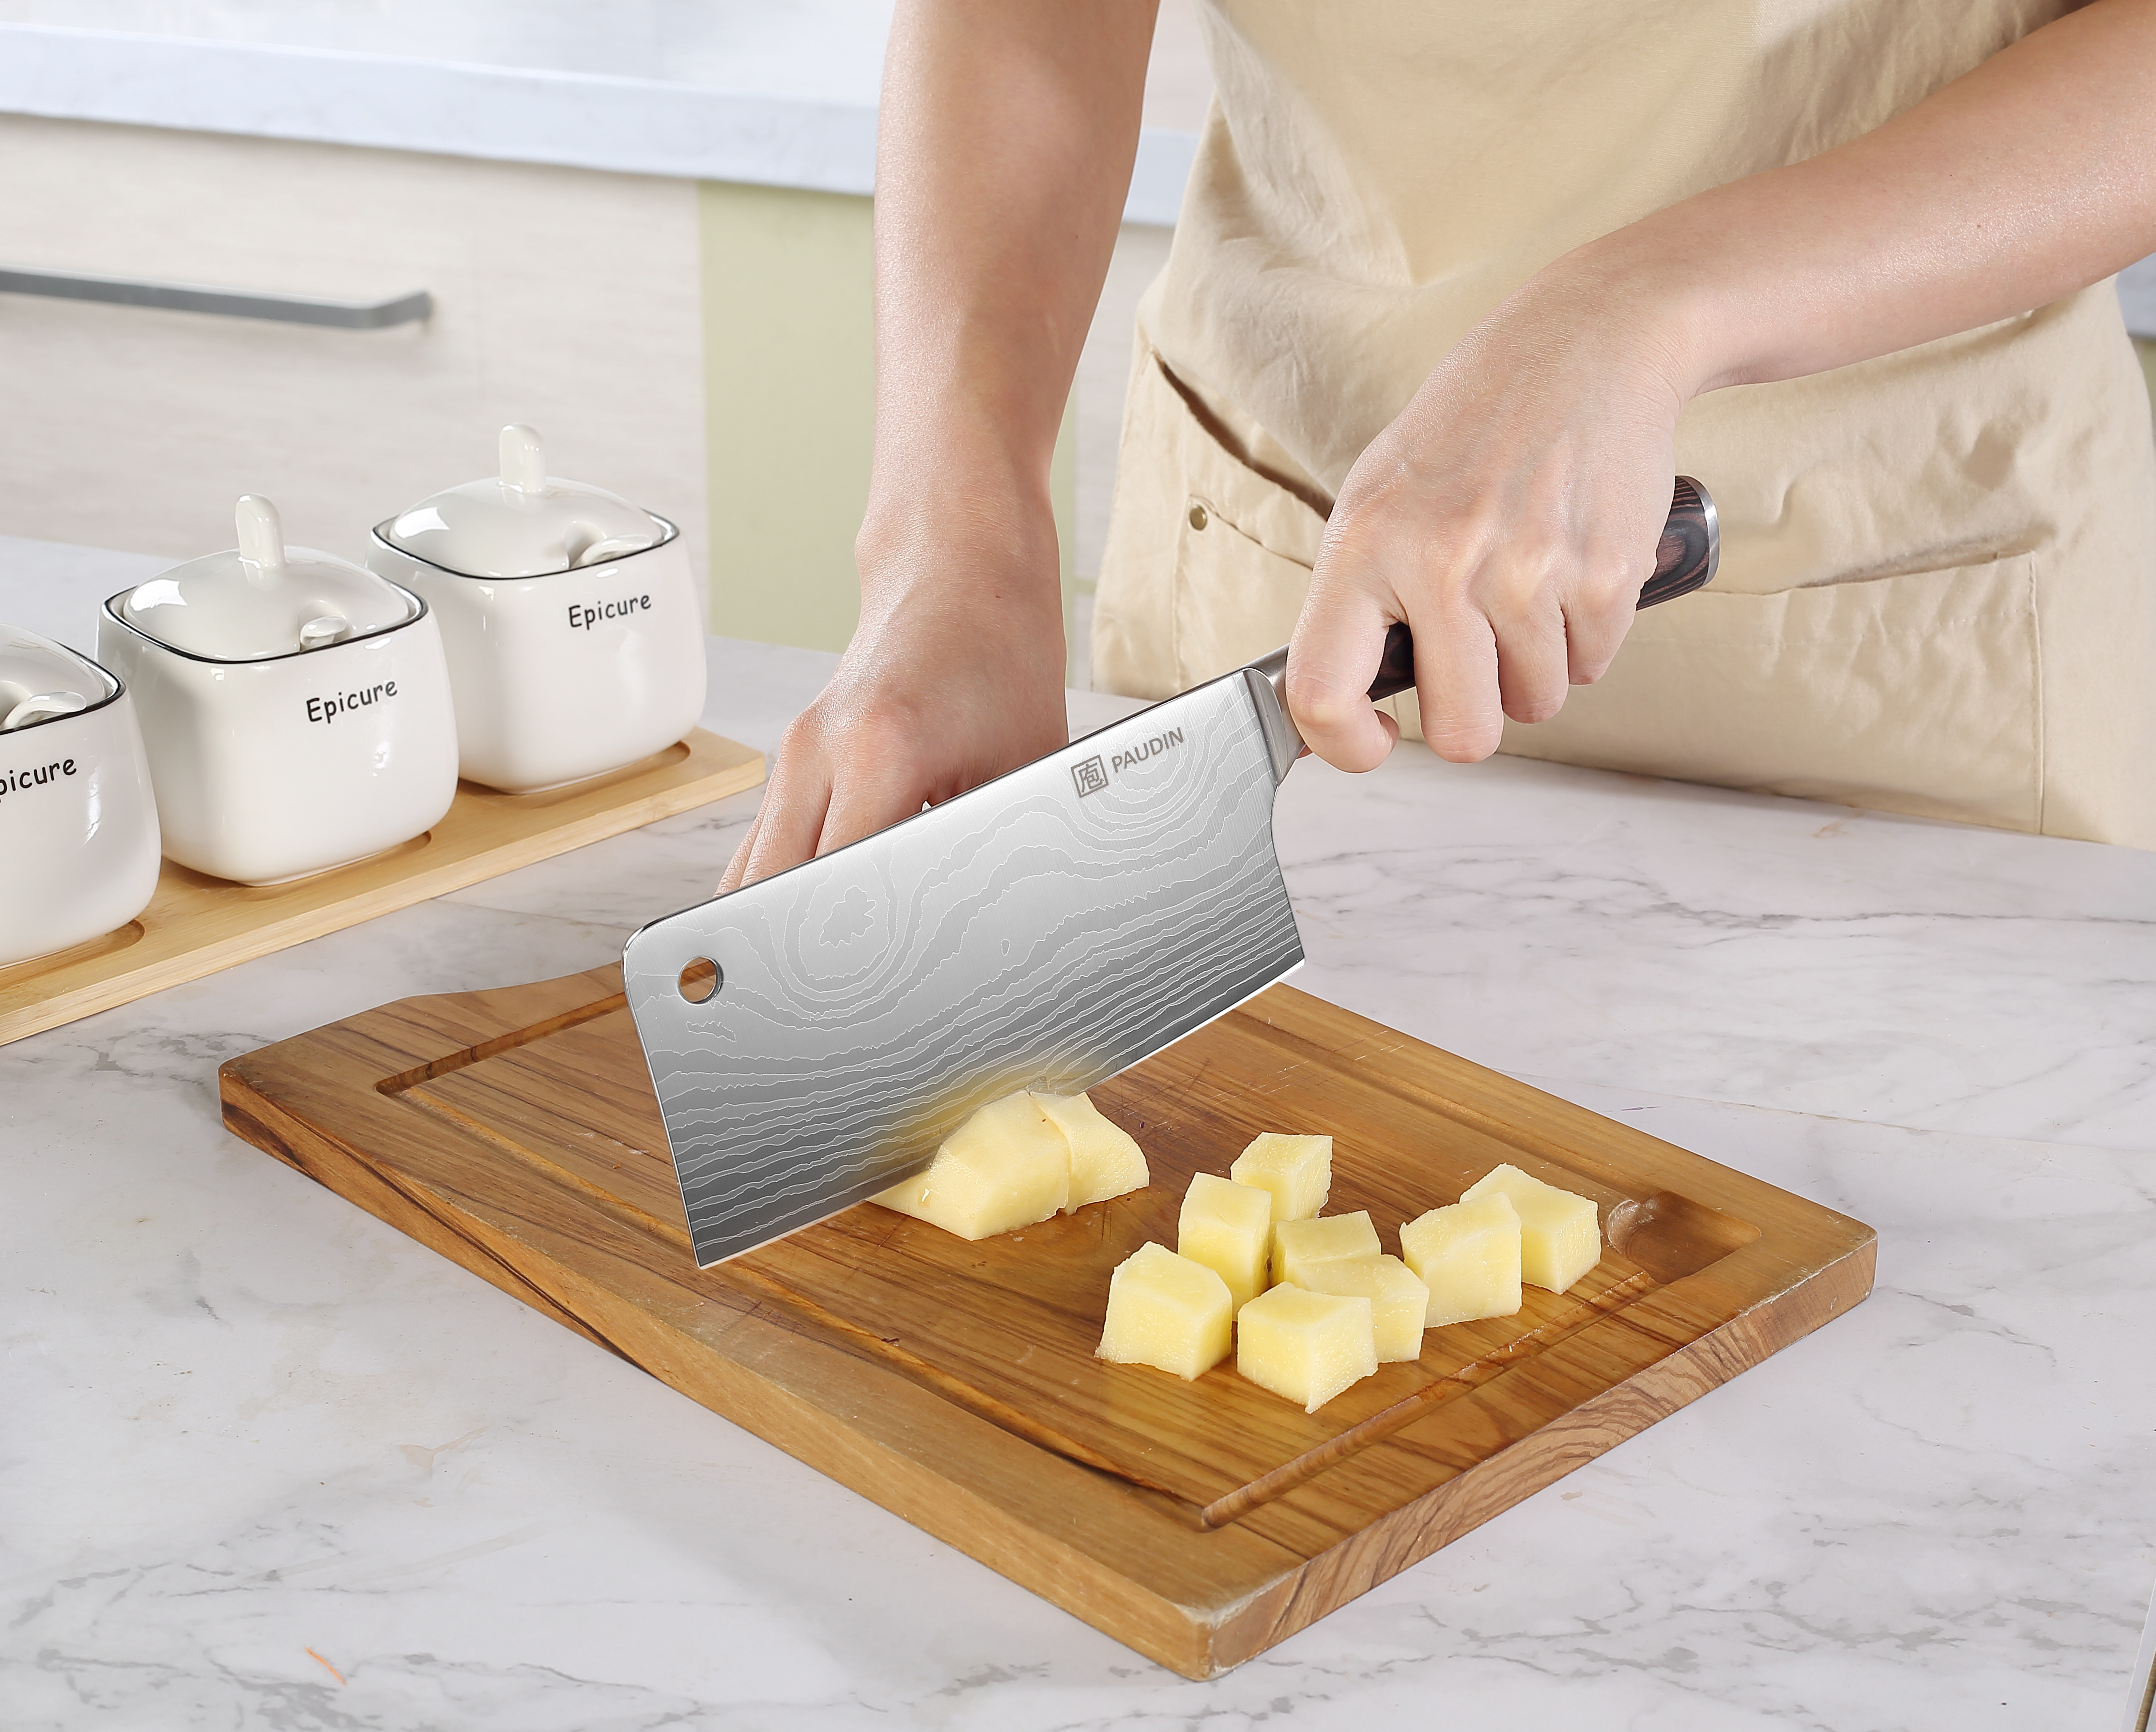 Universal Chinese Cleaver